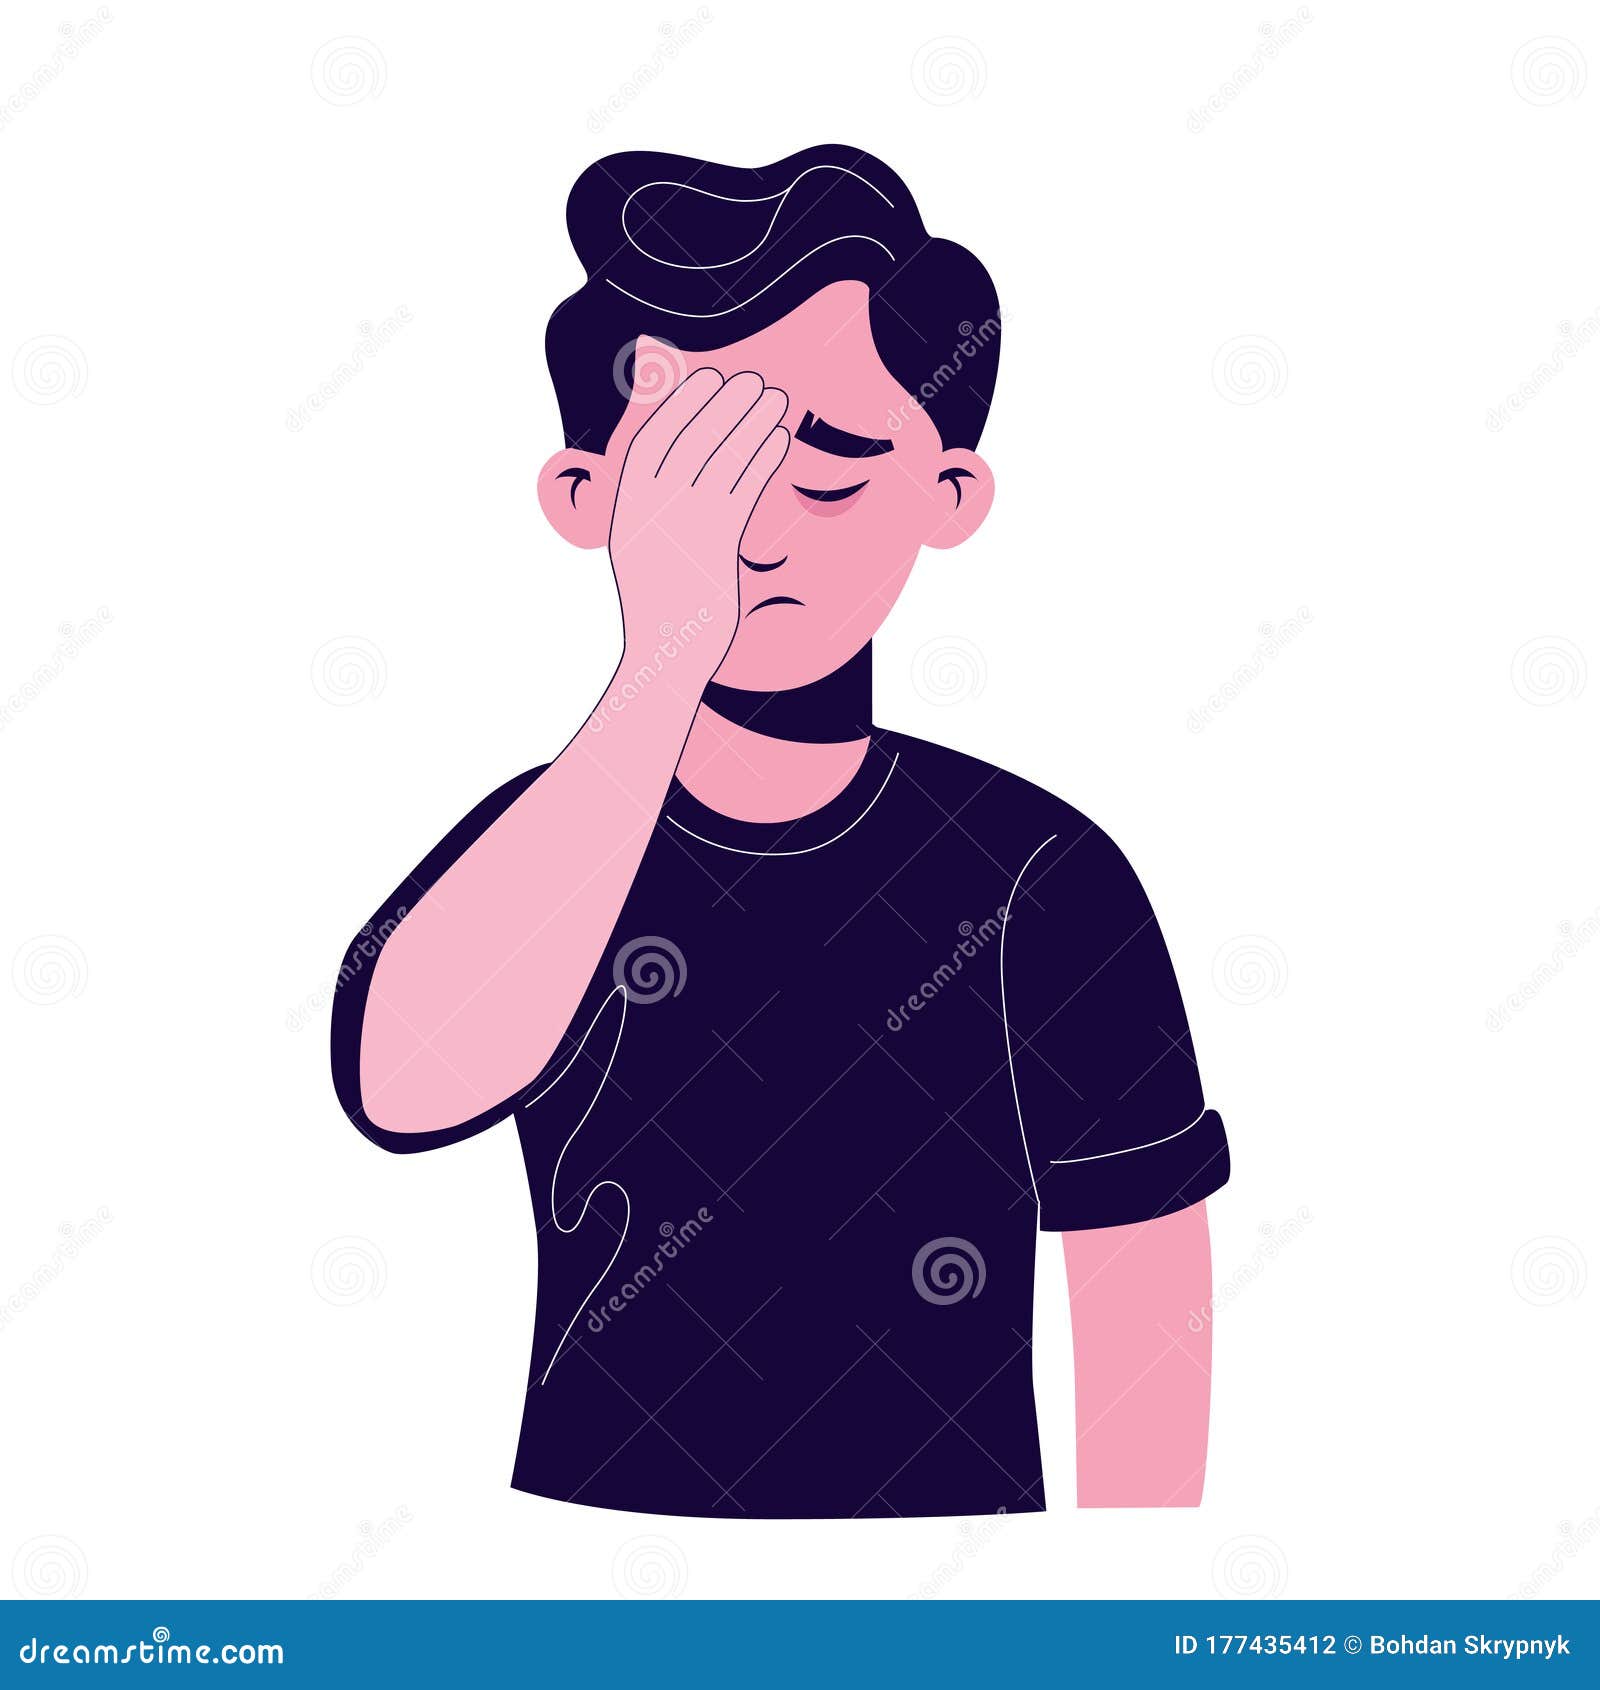 Cartoon Male Making Gesture Face Palm in Complete Disappointment and  Disbelief Isolated Stock Vector - Illustration of fail, expression:  177435412